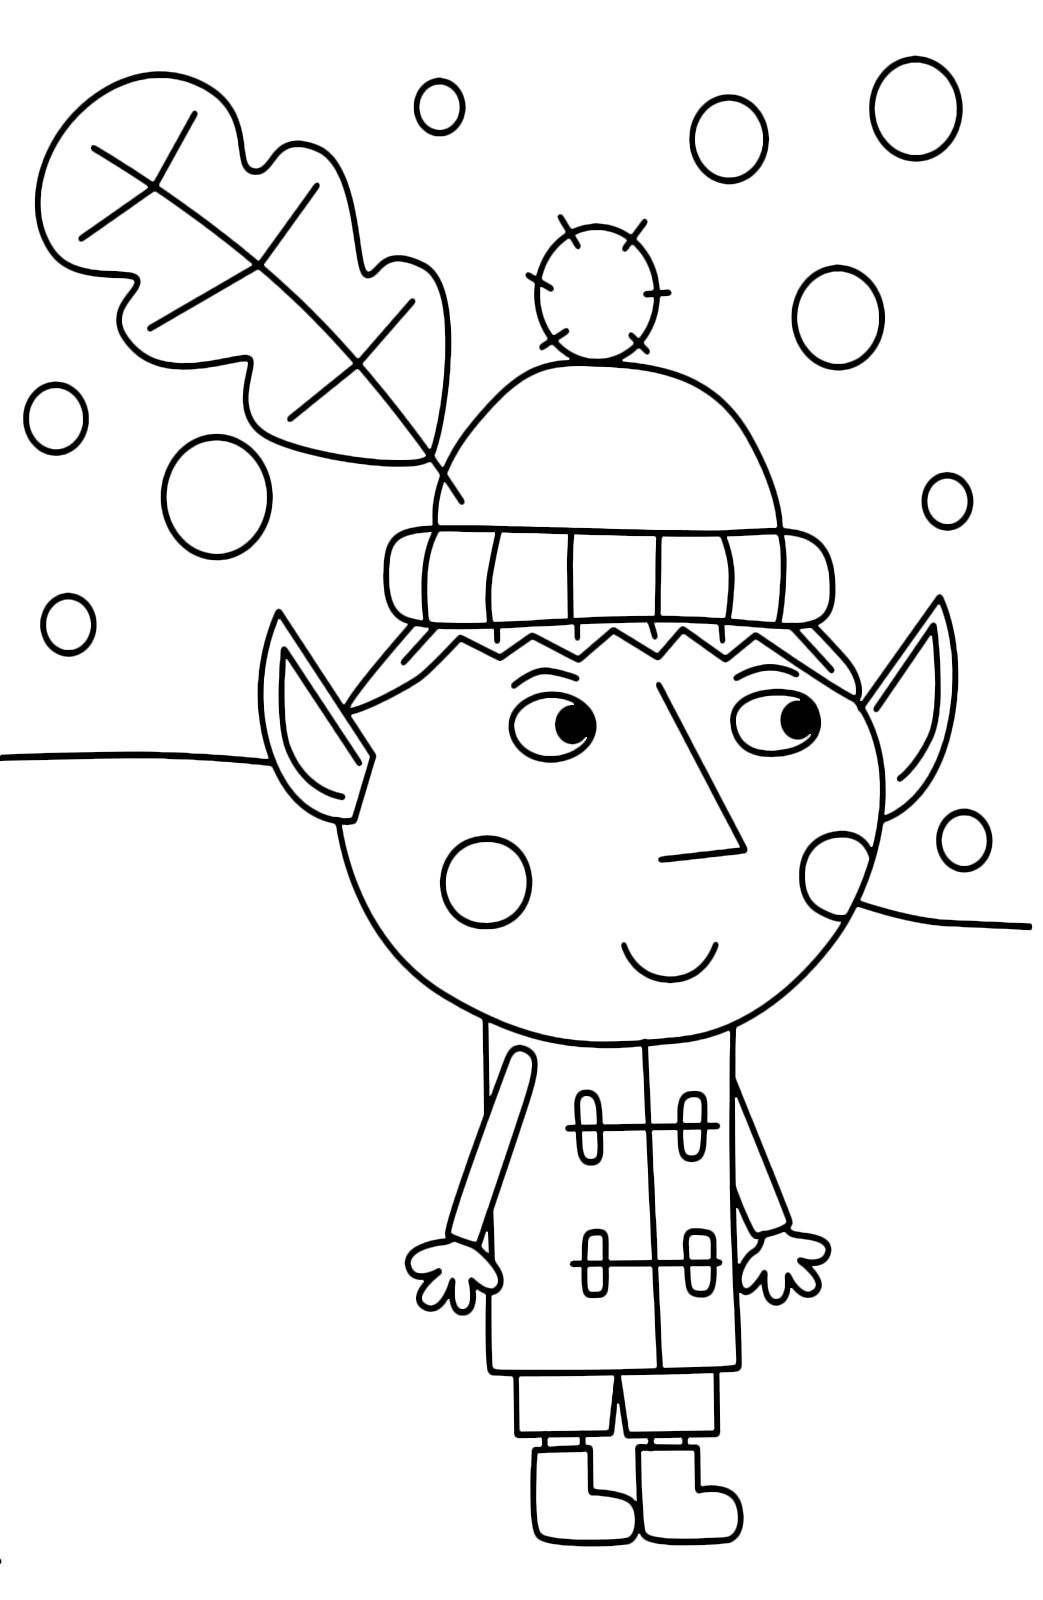 Ben & Holly's Little Kingdom - Ben on the snow with a warm coat